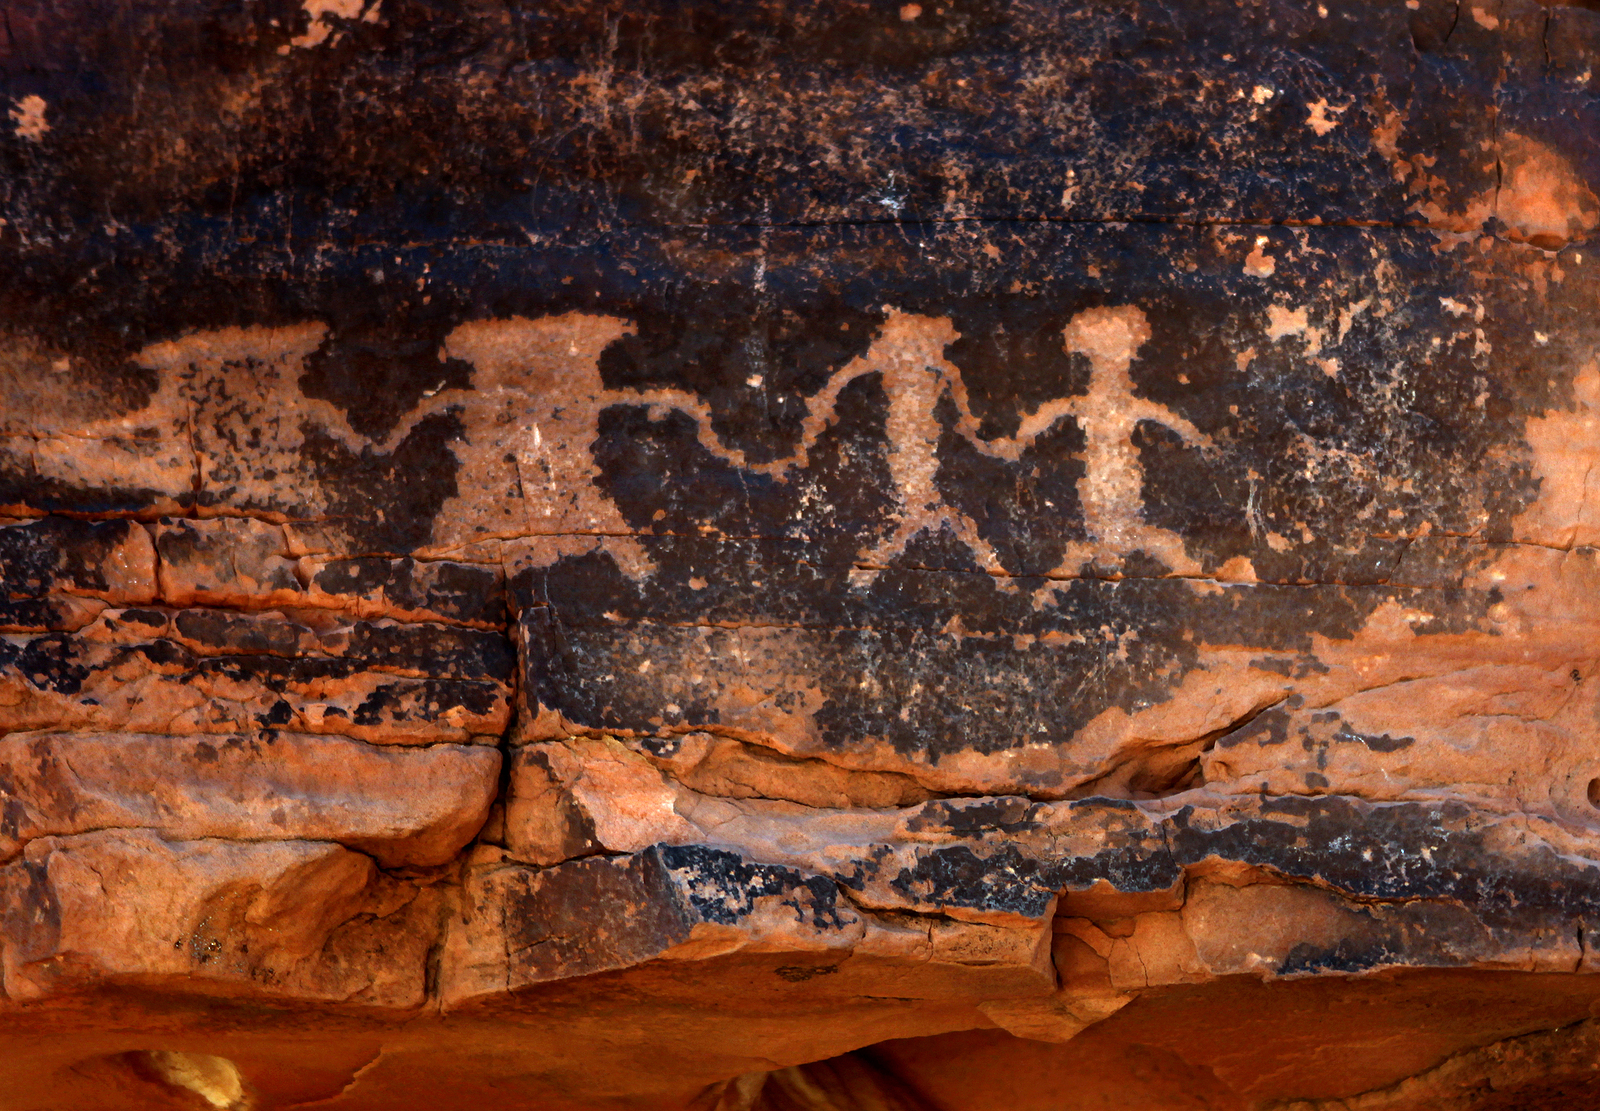 Native American Petroglyphs in Red Sandstone From the Southweste